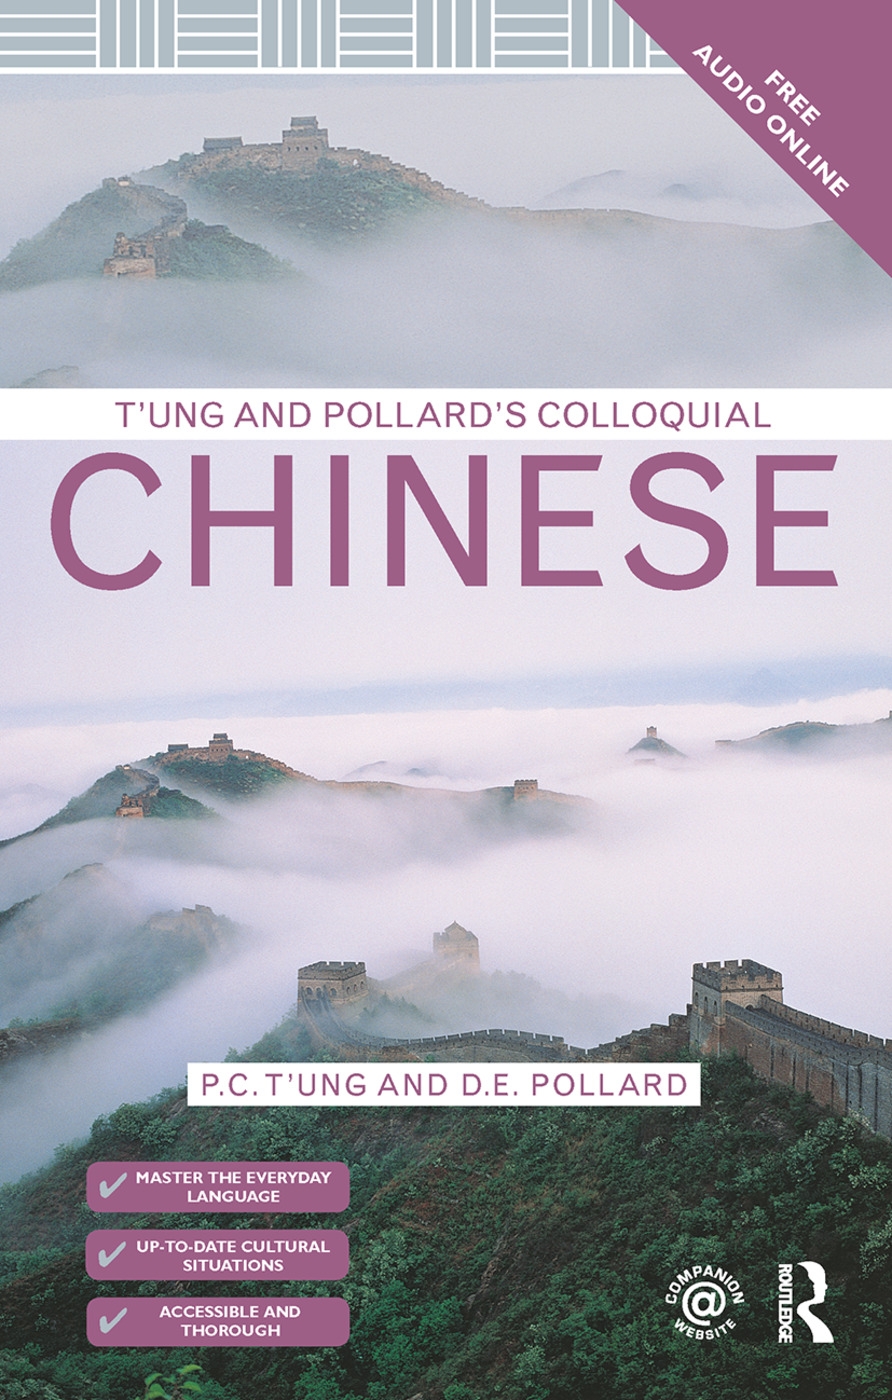 T’Ung & Pollard’s Colloquial Chinese